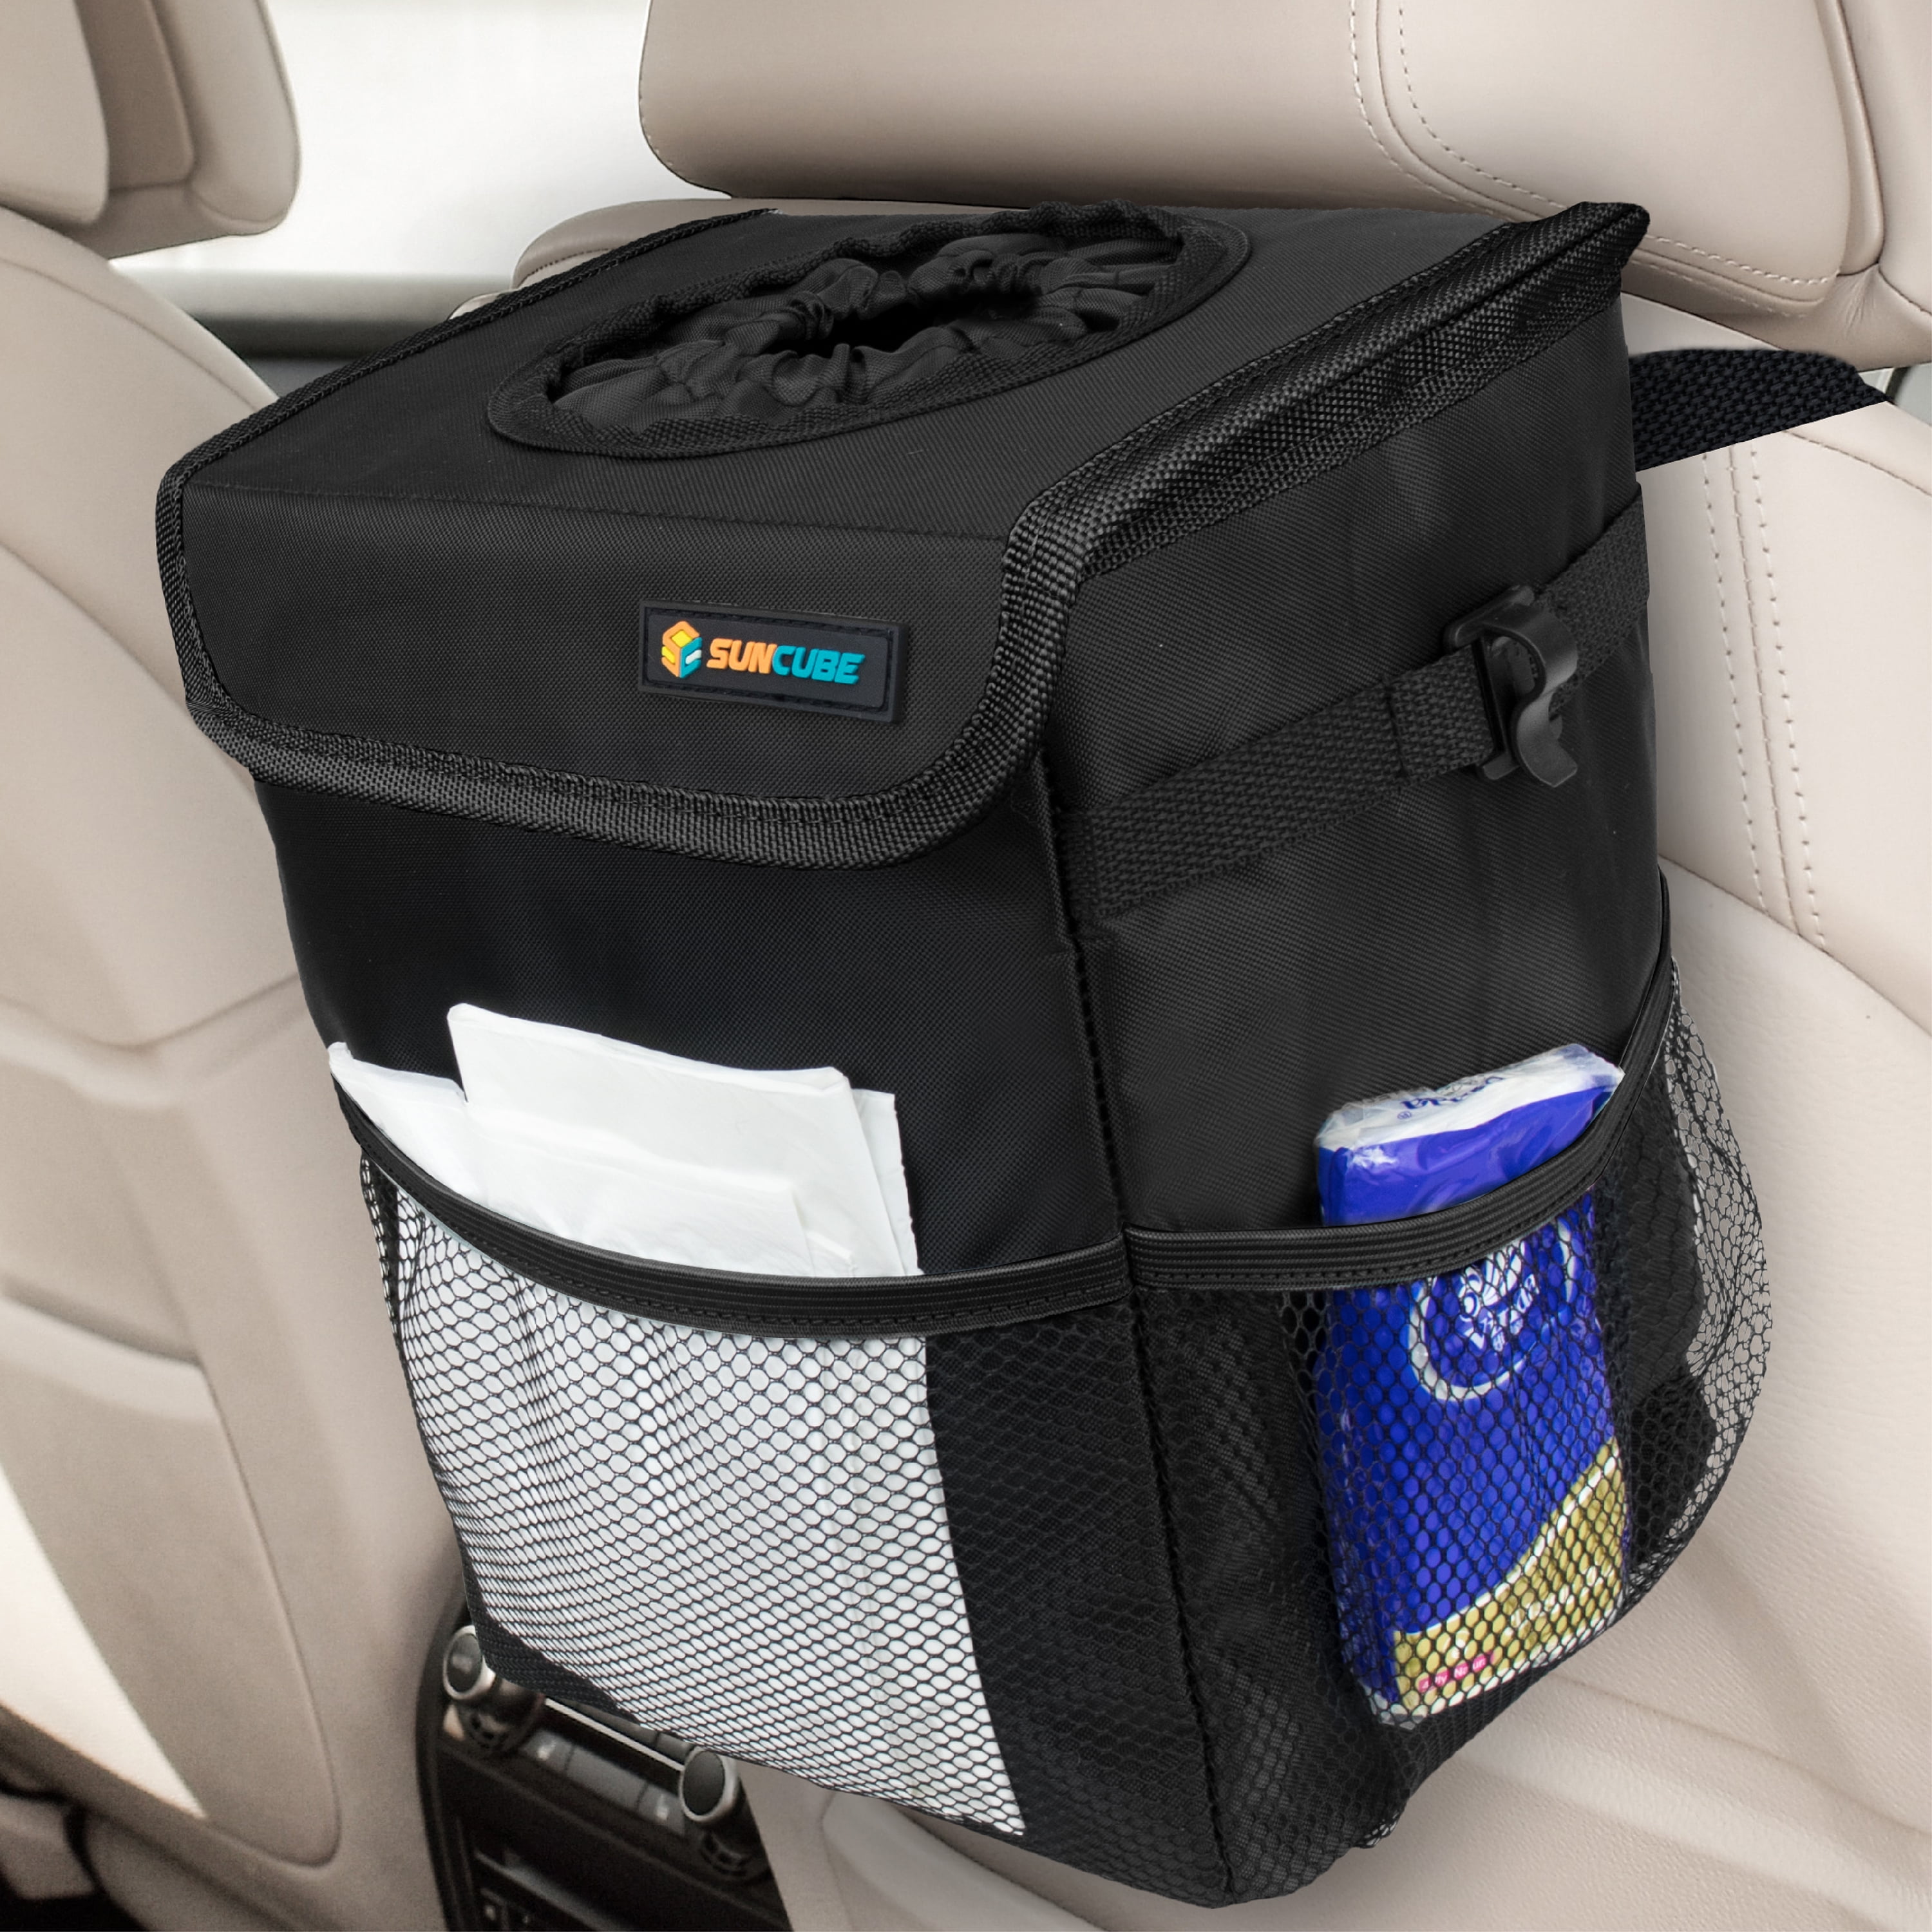 EPAuto Waterproof Car Trash Can with Lid and Storage Pockets, Black 